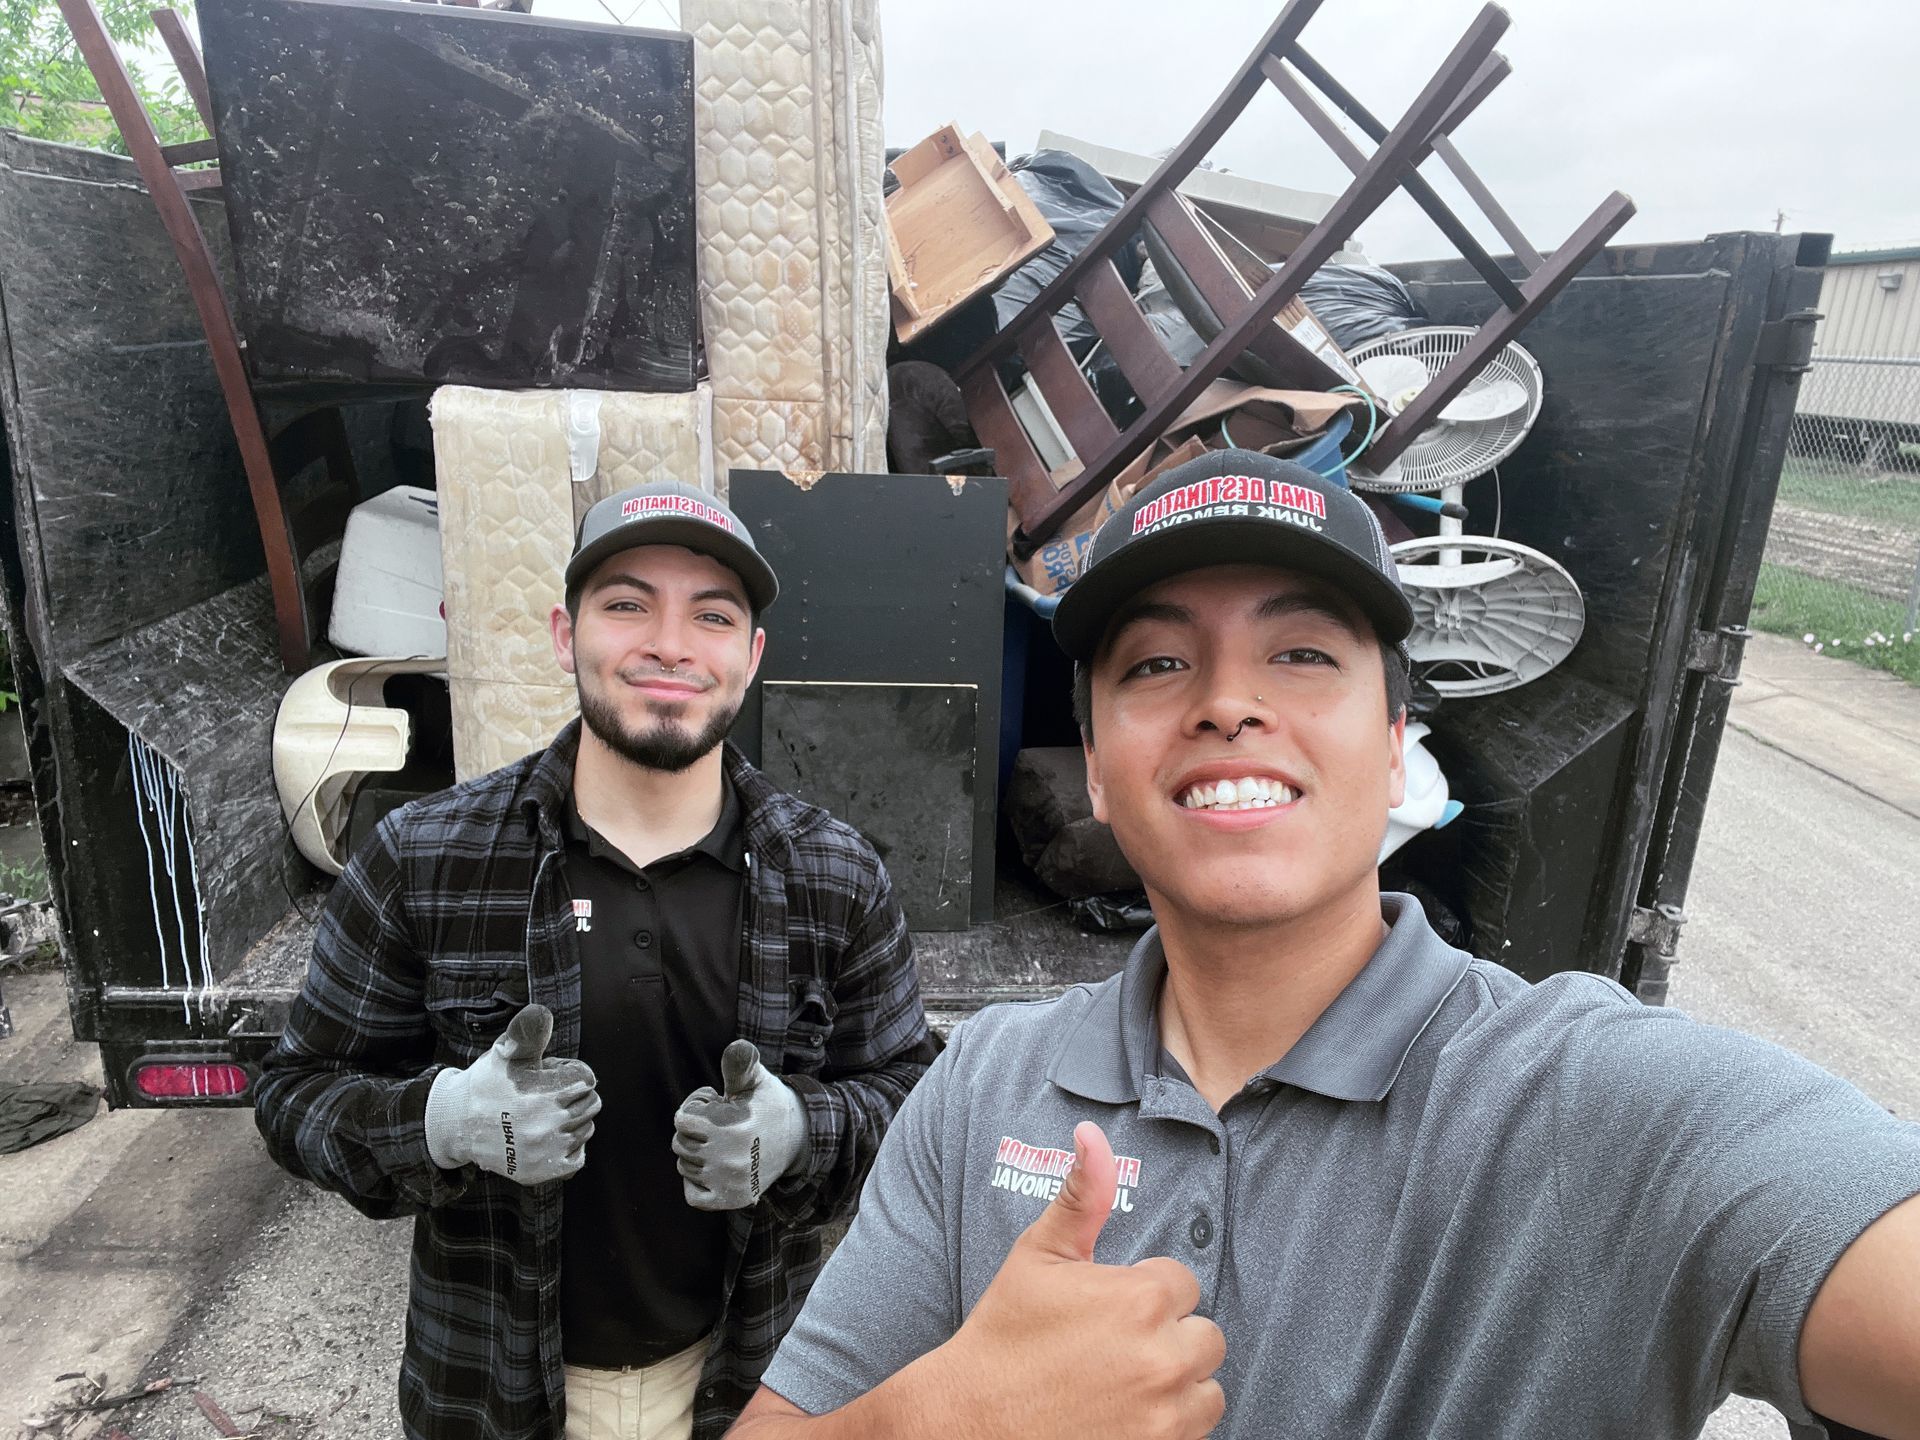 Final Destination Junk Removal is locally-owned and operated in Live Oak, Texas. We help the community with junk removal, hauling and disposal. If you want to get rid of junk, call Final Destination, your local junk removal service near me.